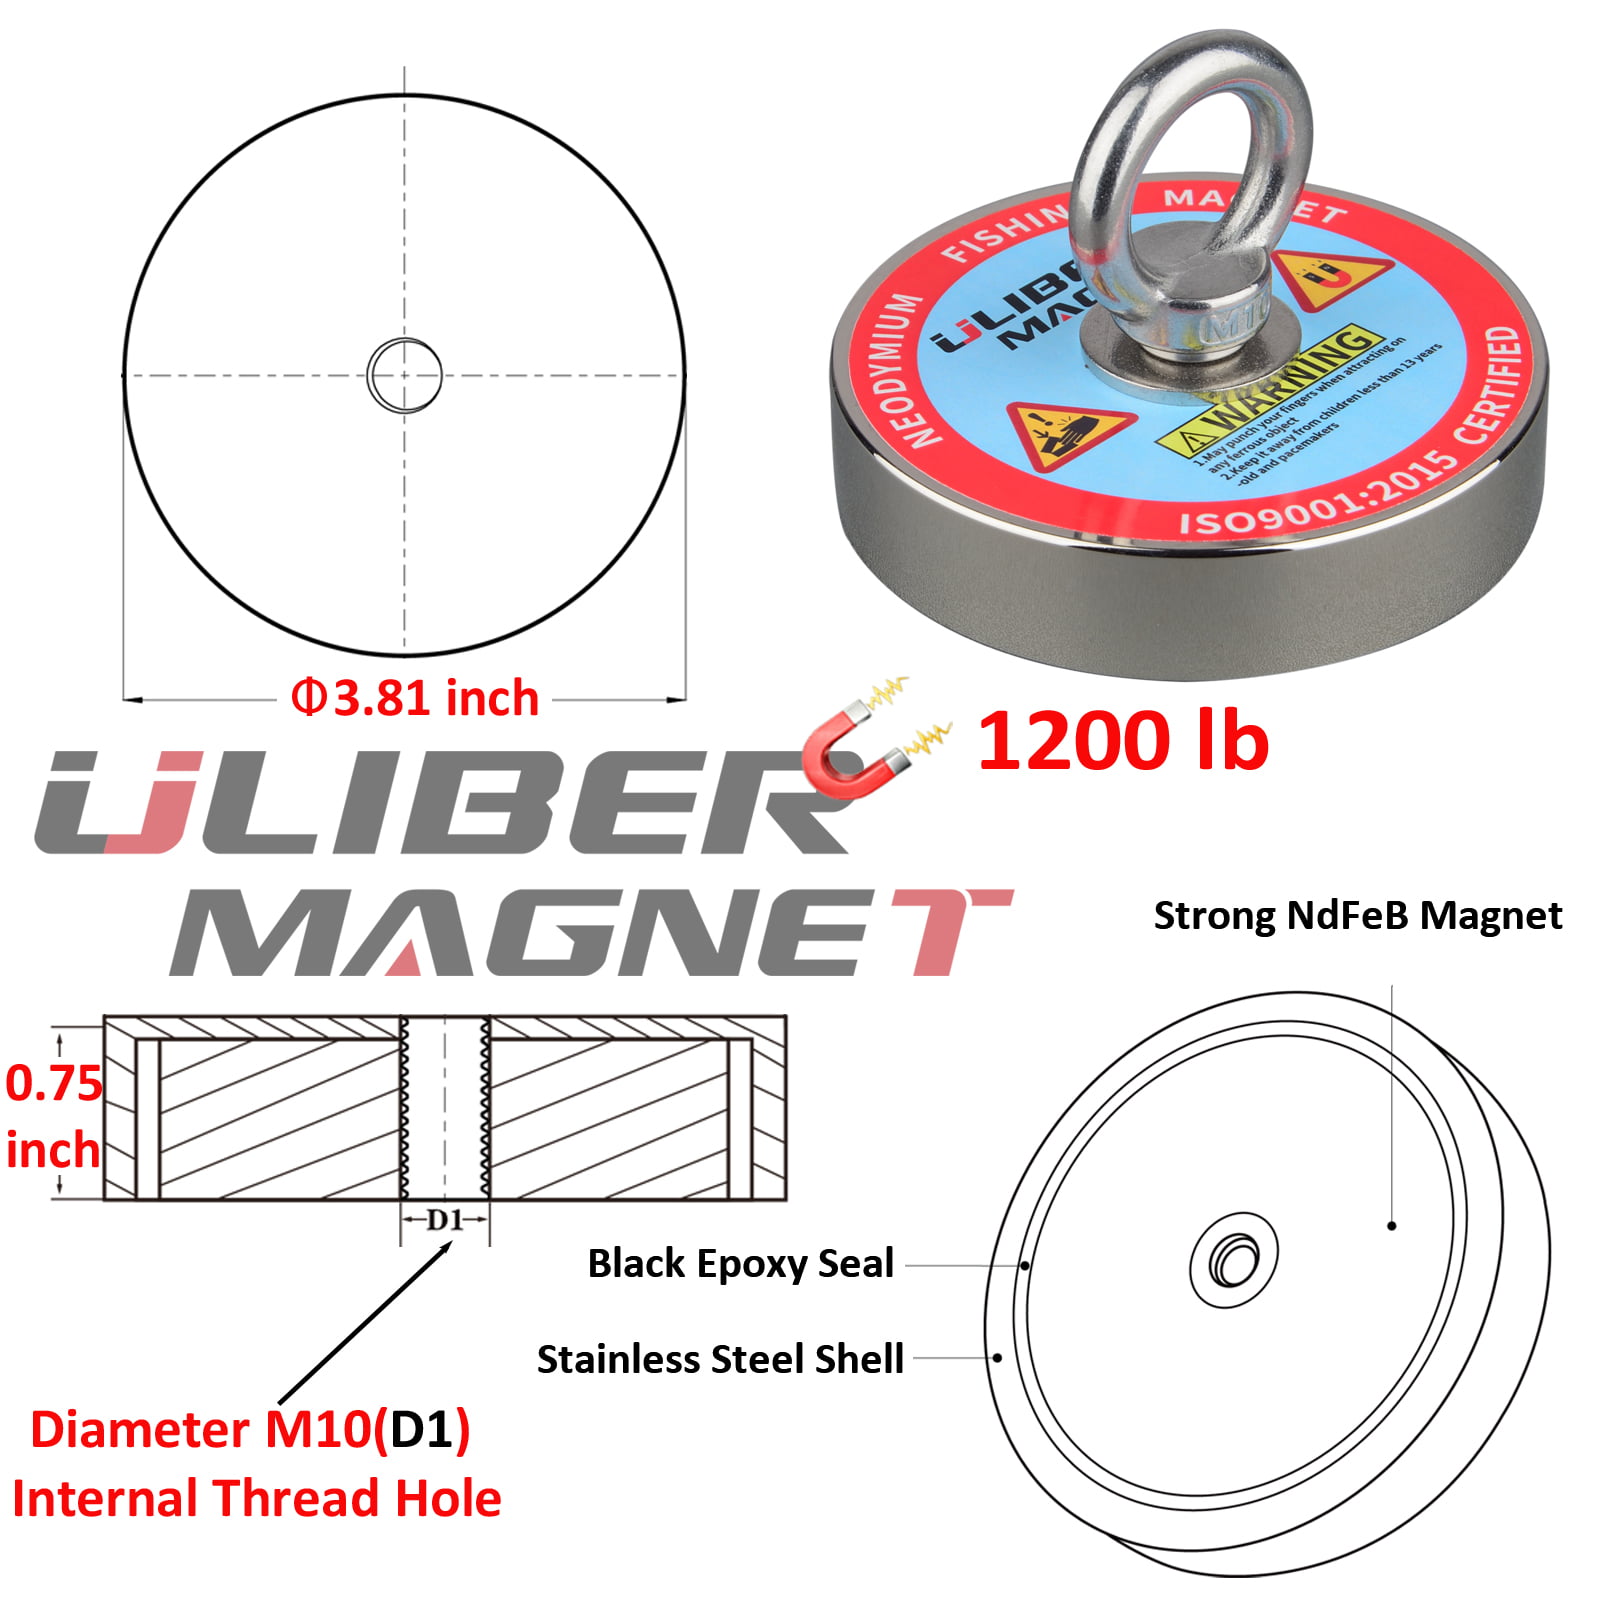 1200 lbs Pulling Force Magnet Fishing Kit - 3 inch Colombia